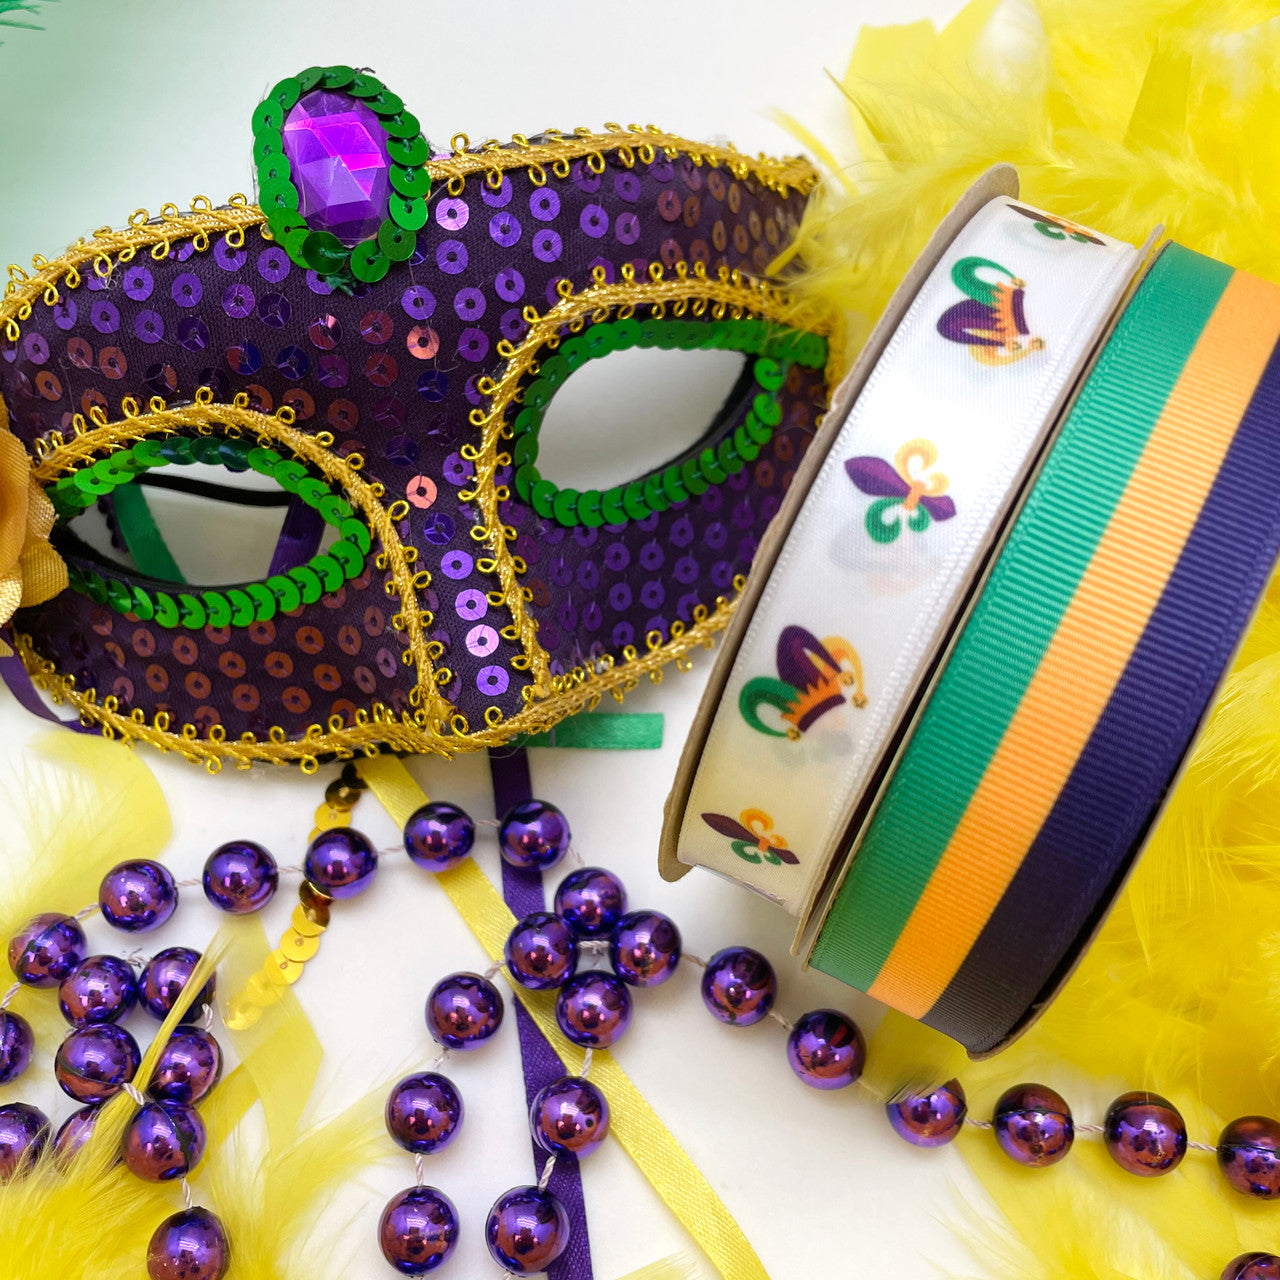 Our jester hats and stripes work together for the perfect gift wrap with a Fat Tuesday theme.